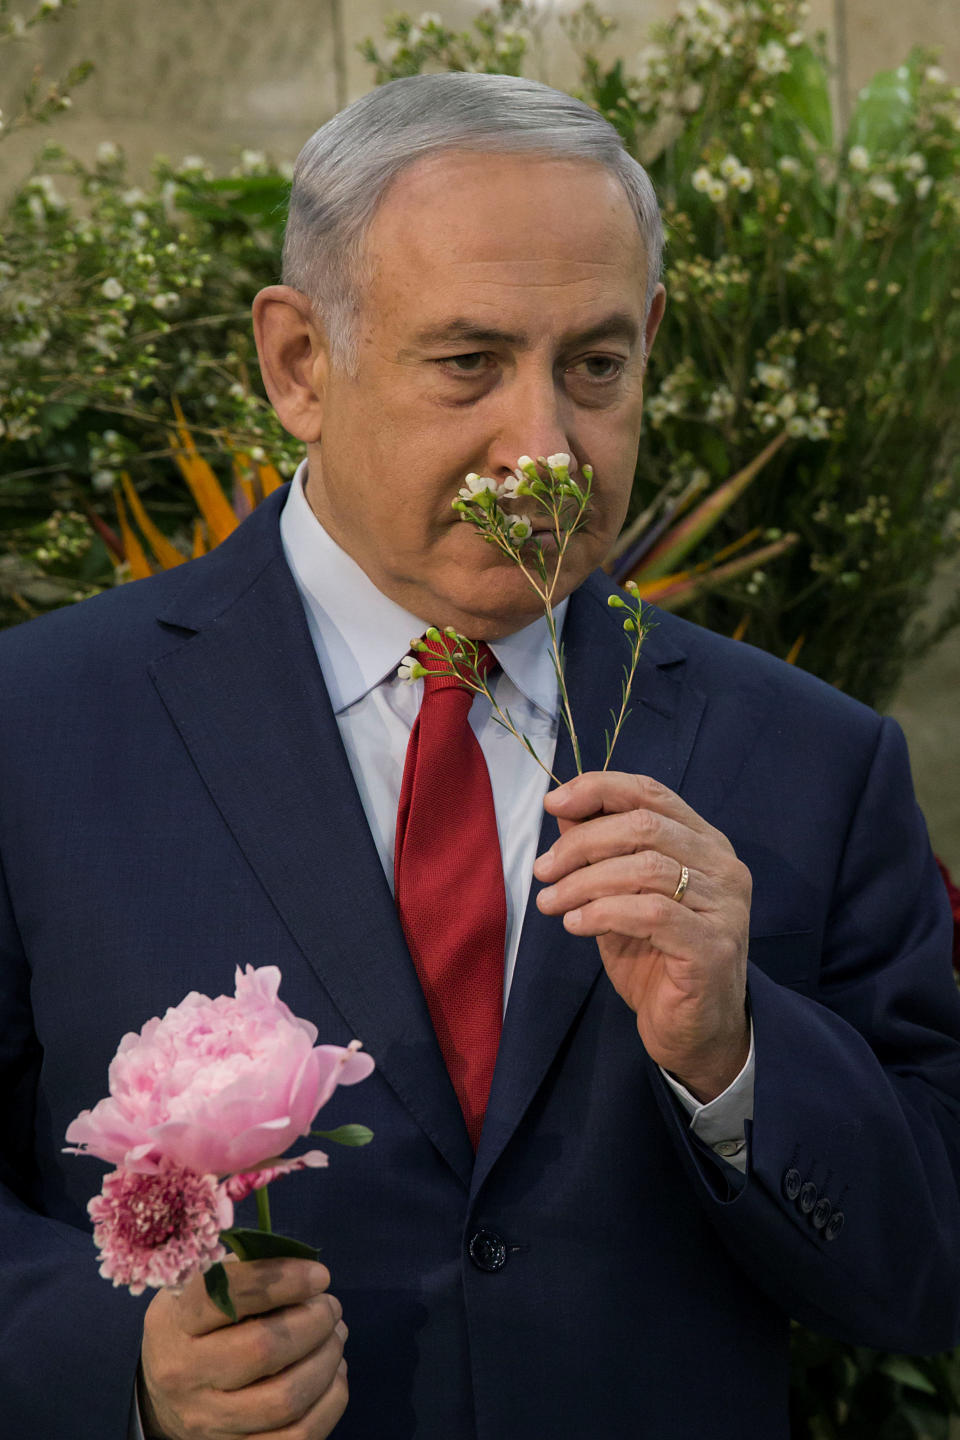 Israeli Prime Minister Benjamin Netanyahu smells a flower during an exhibition of Israeli agricultural produce ahead of the weekly cabinet meeting at the Prime Minister's office in Jerusalem January 28, 2018. REUTERS/Tsafrir Abayov/Pool